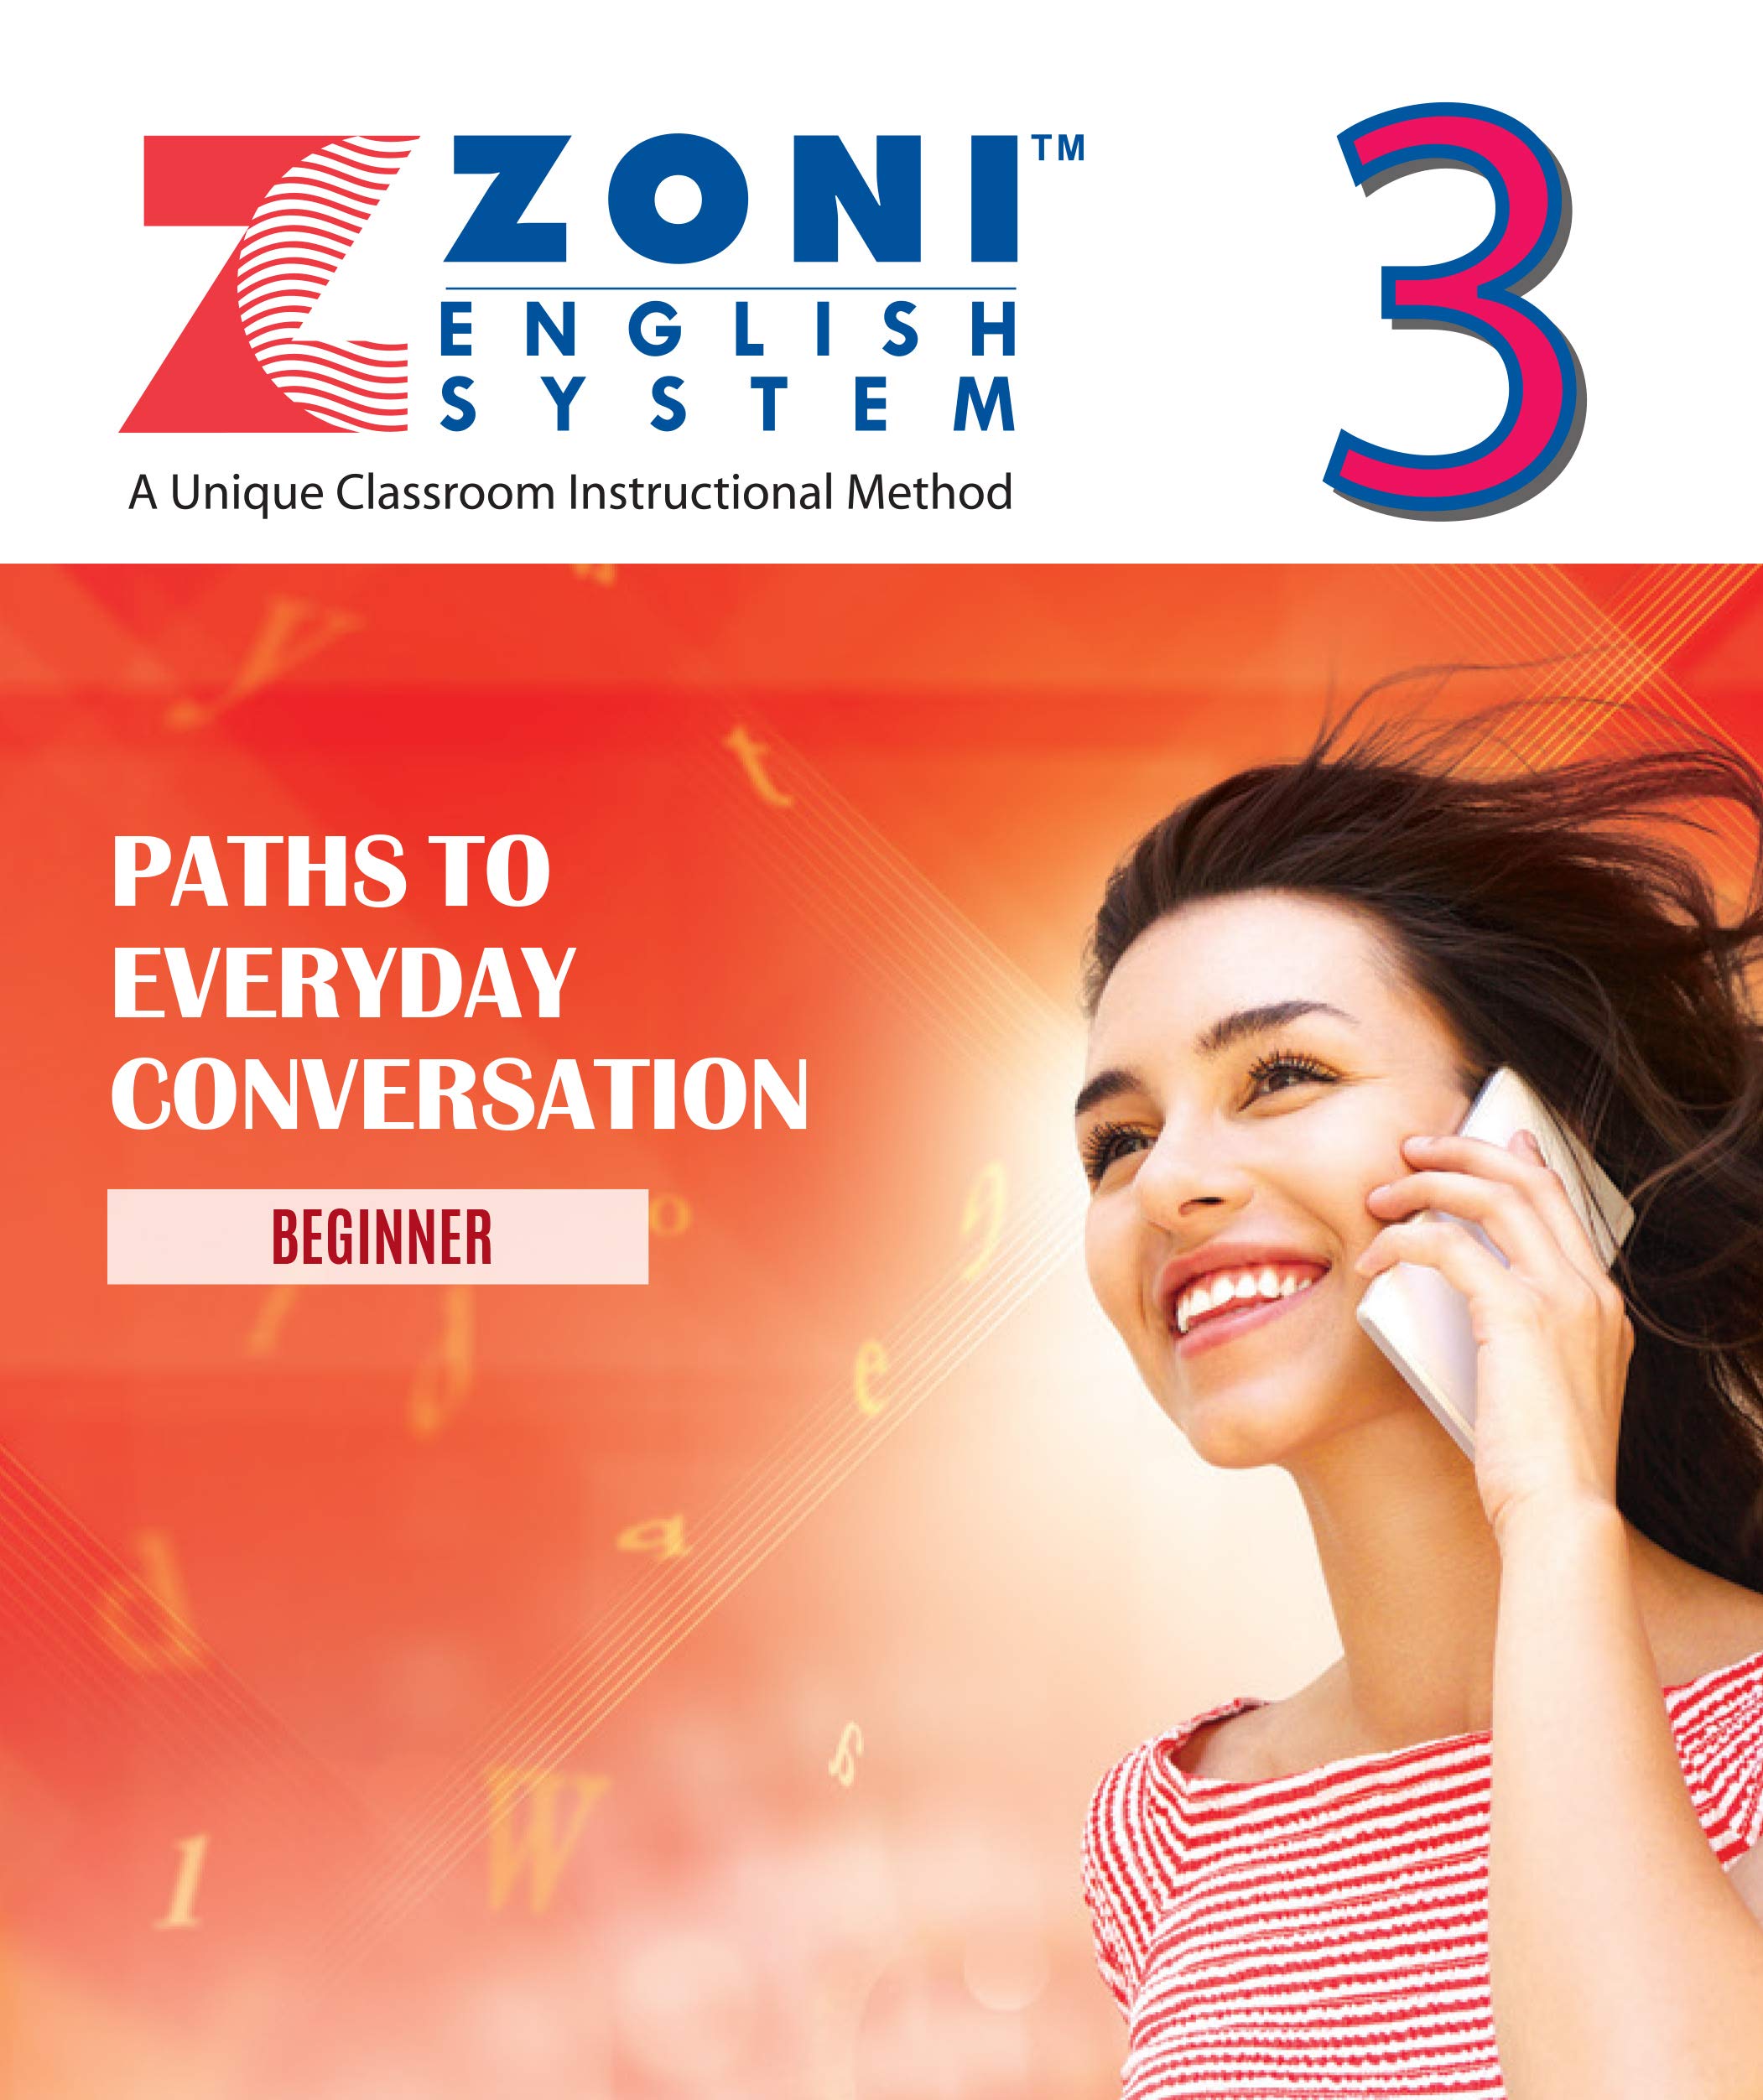 ZONI ENGLISH SYSTEM - PATHS TO EVERYDAY CONVERSATION - Beginner: Book 3 of 12